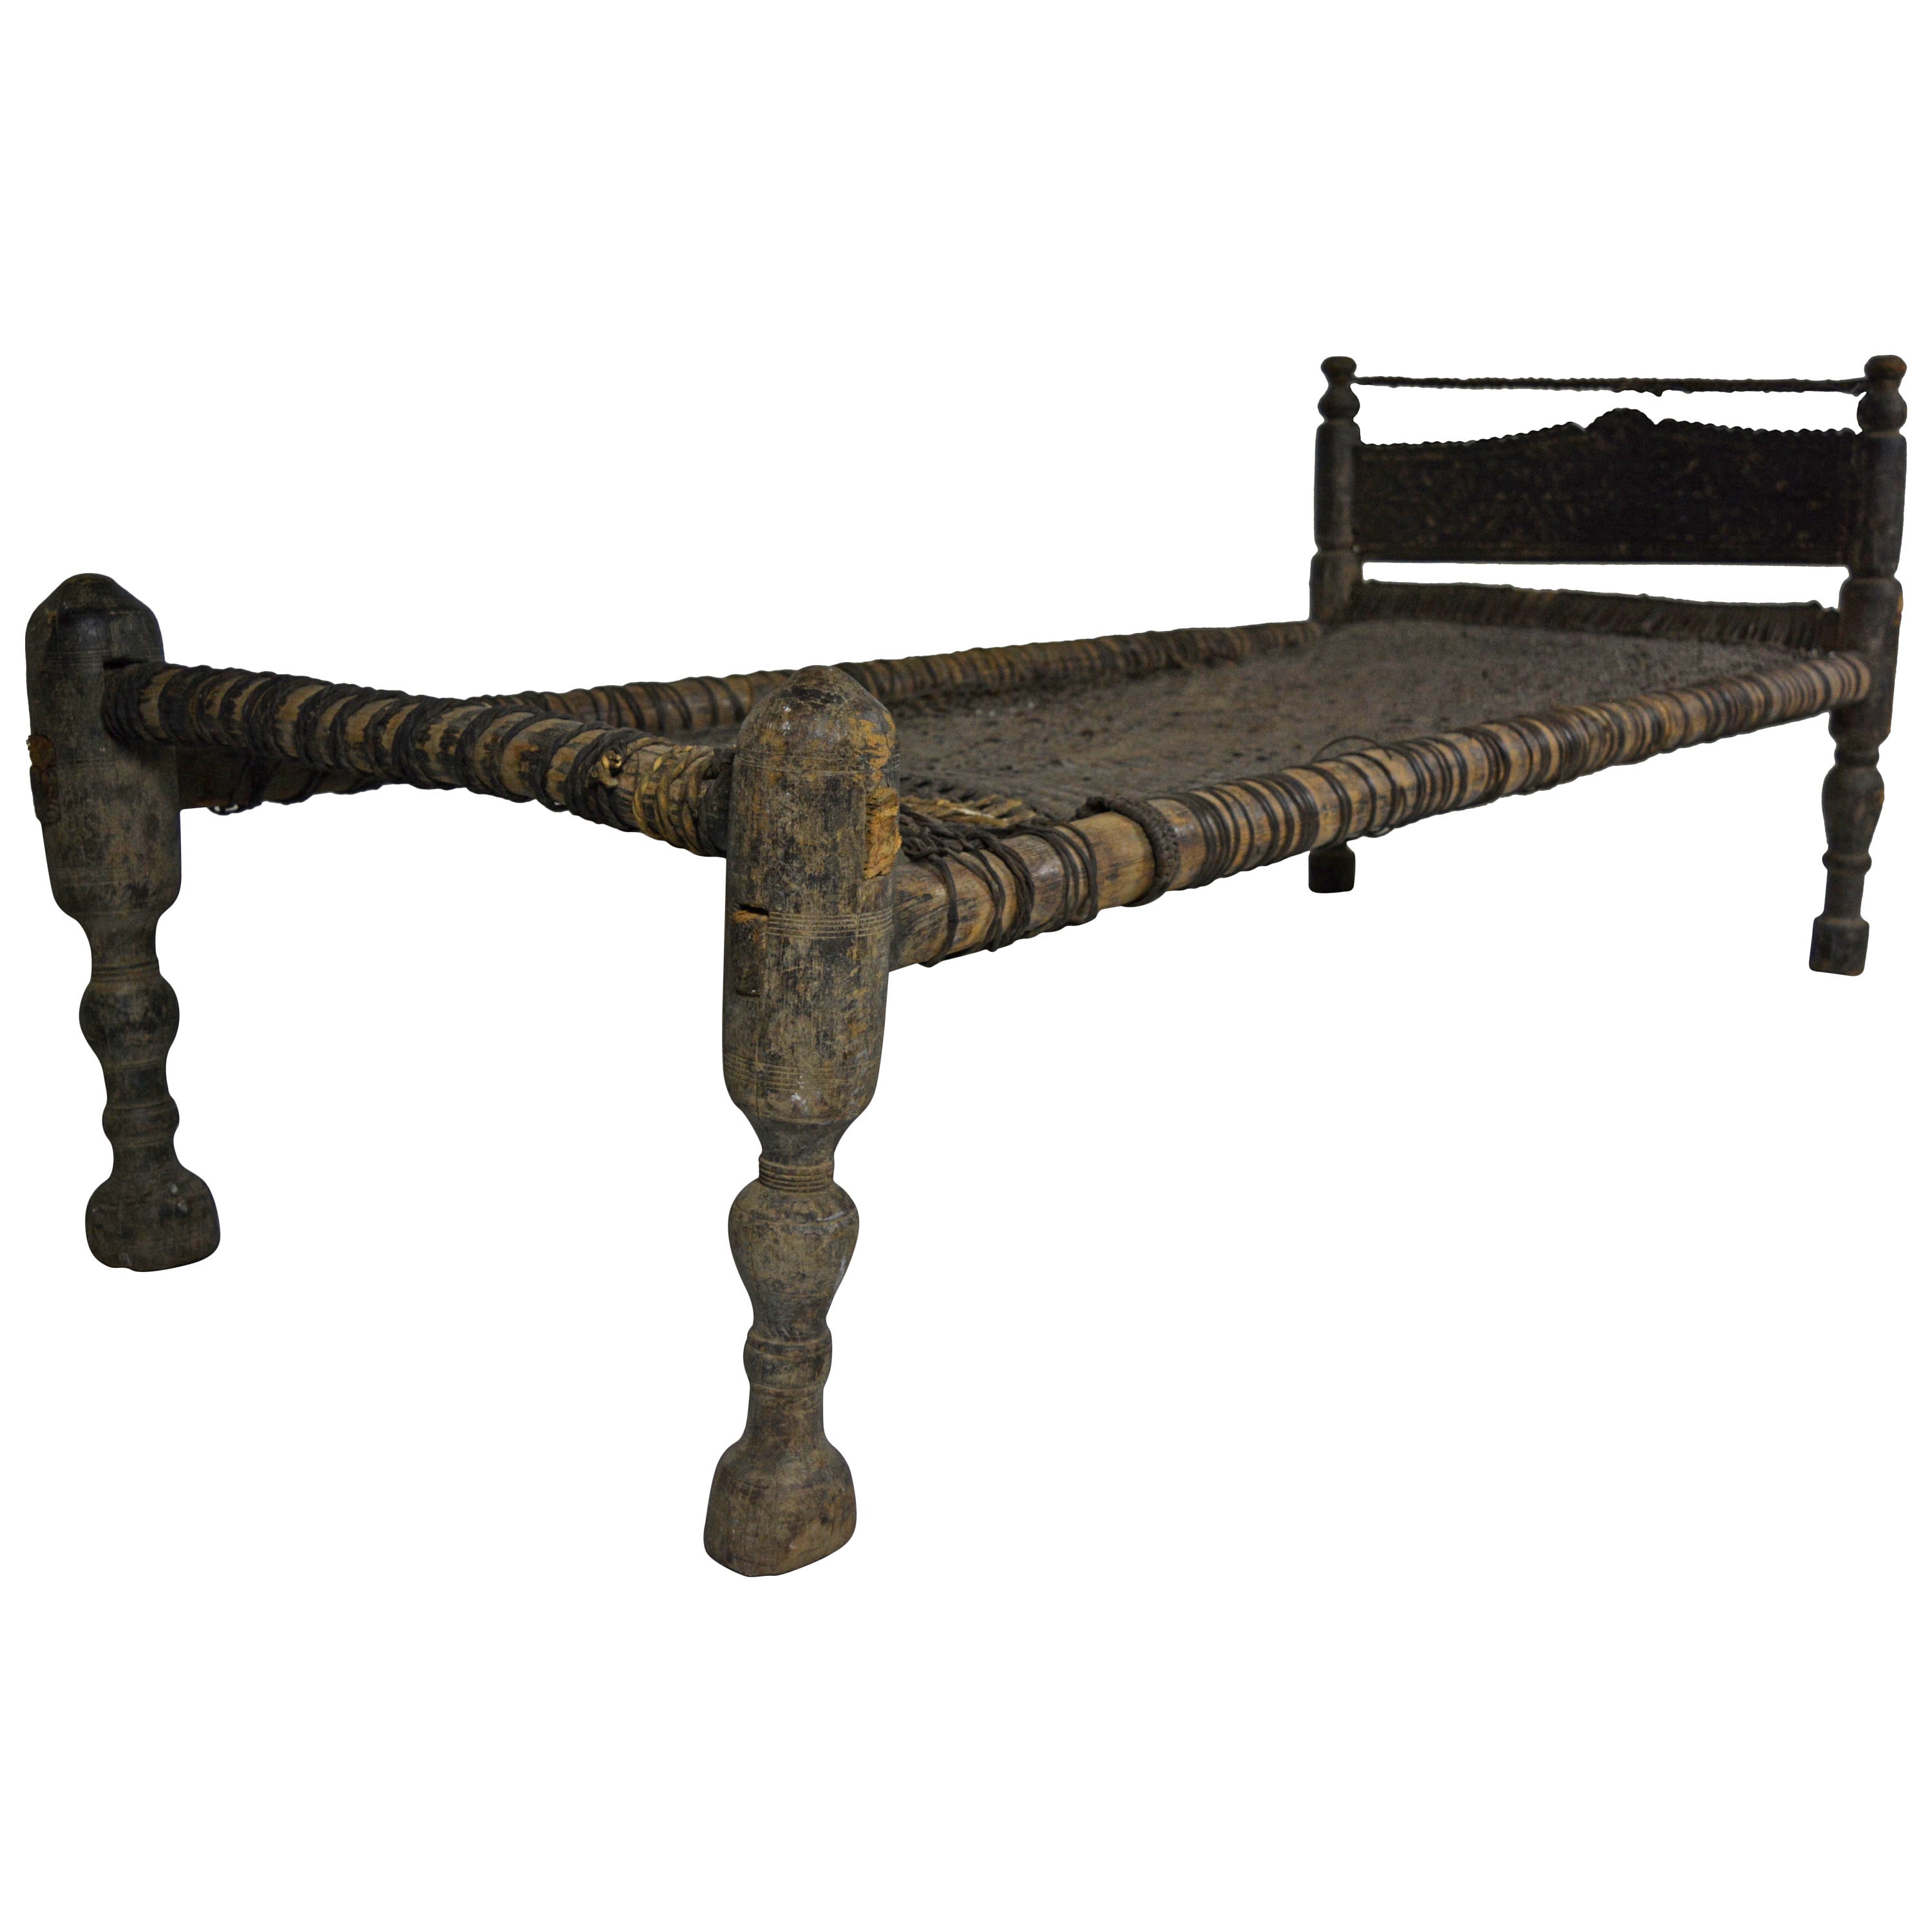 Primitive, 19th Century "Charpai" Daybed